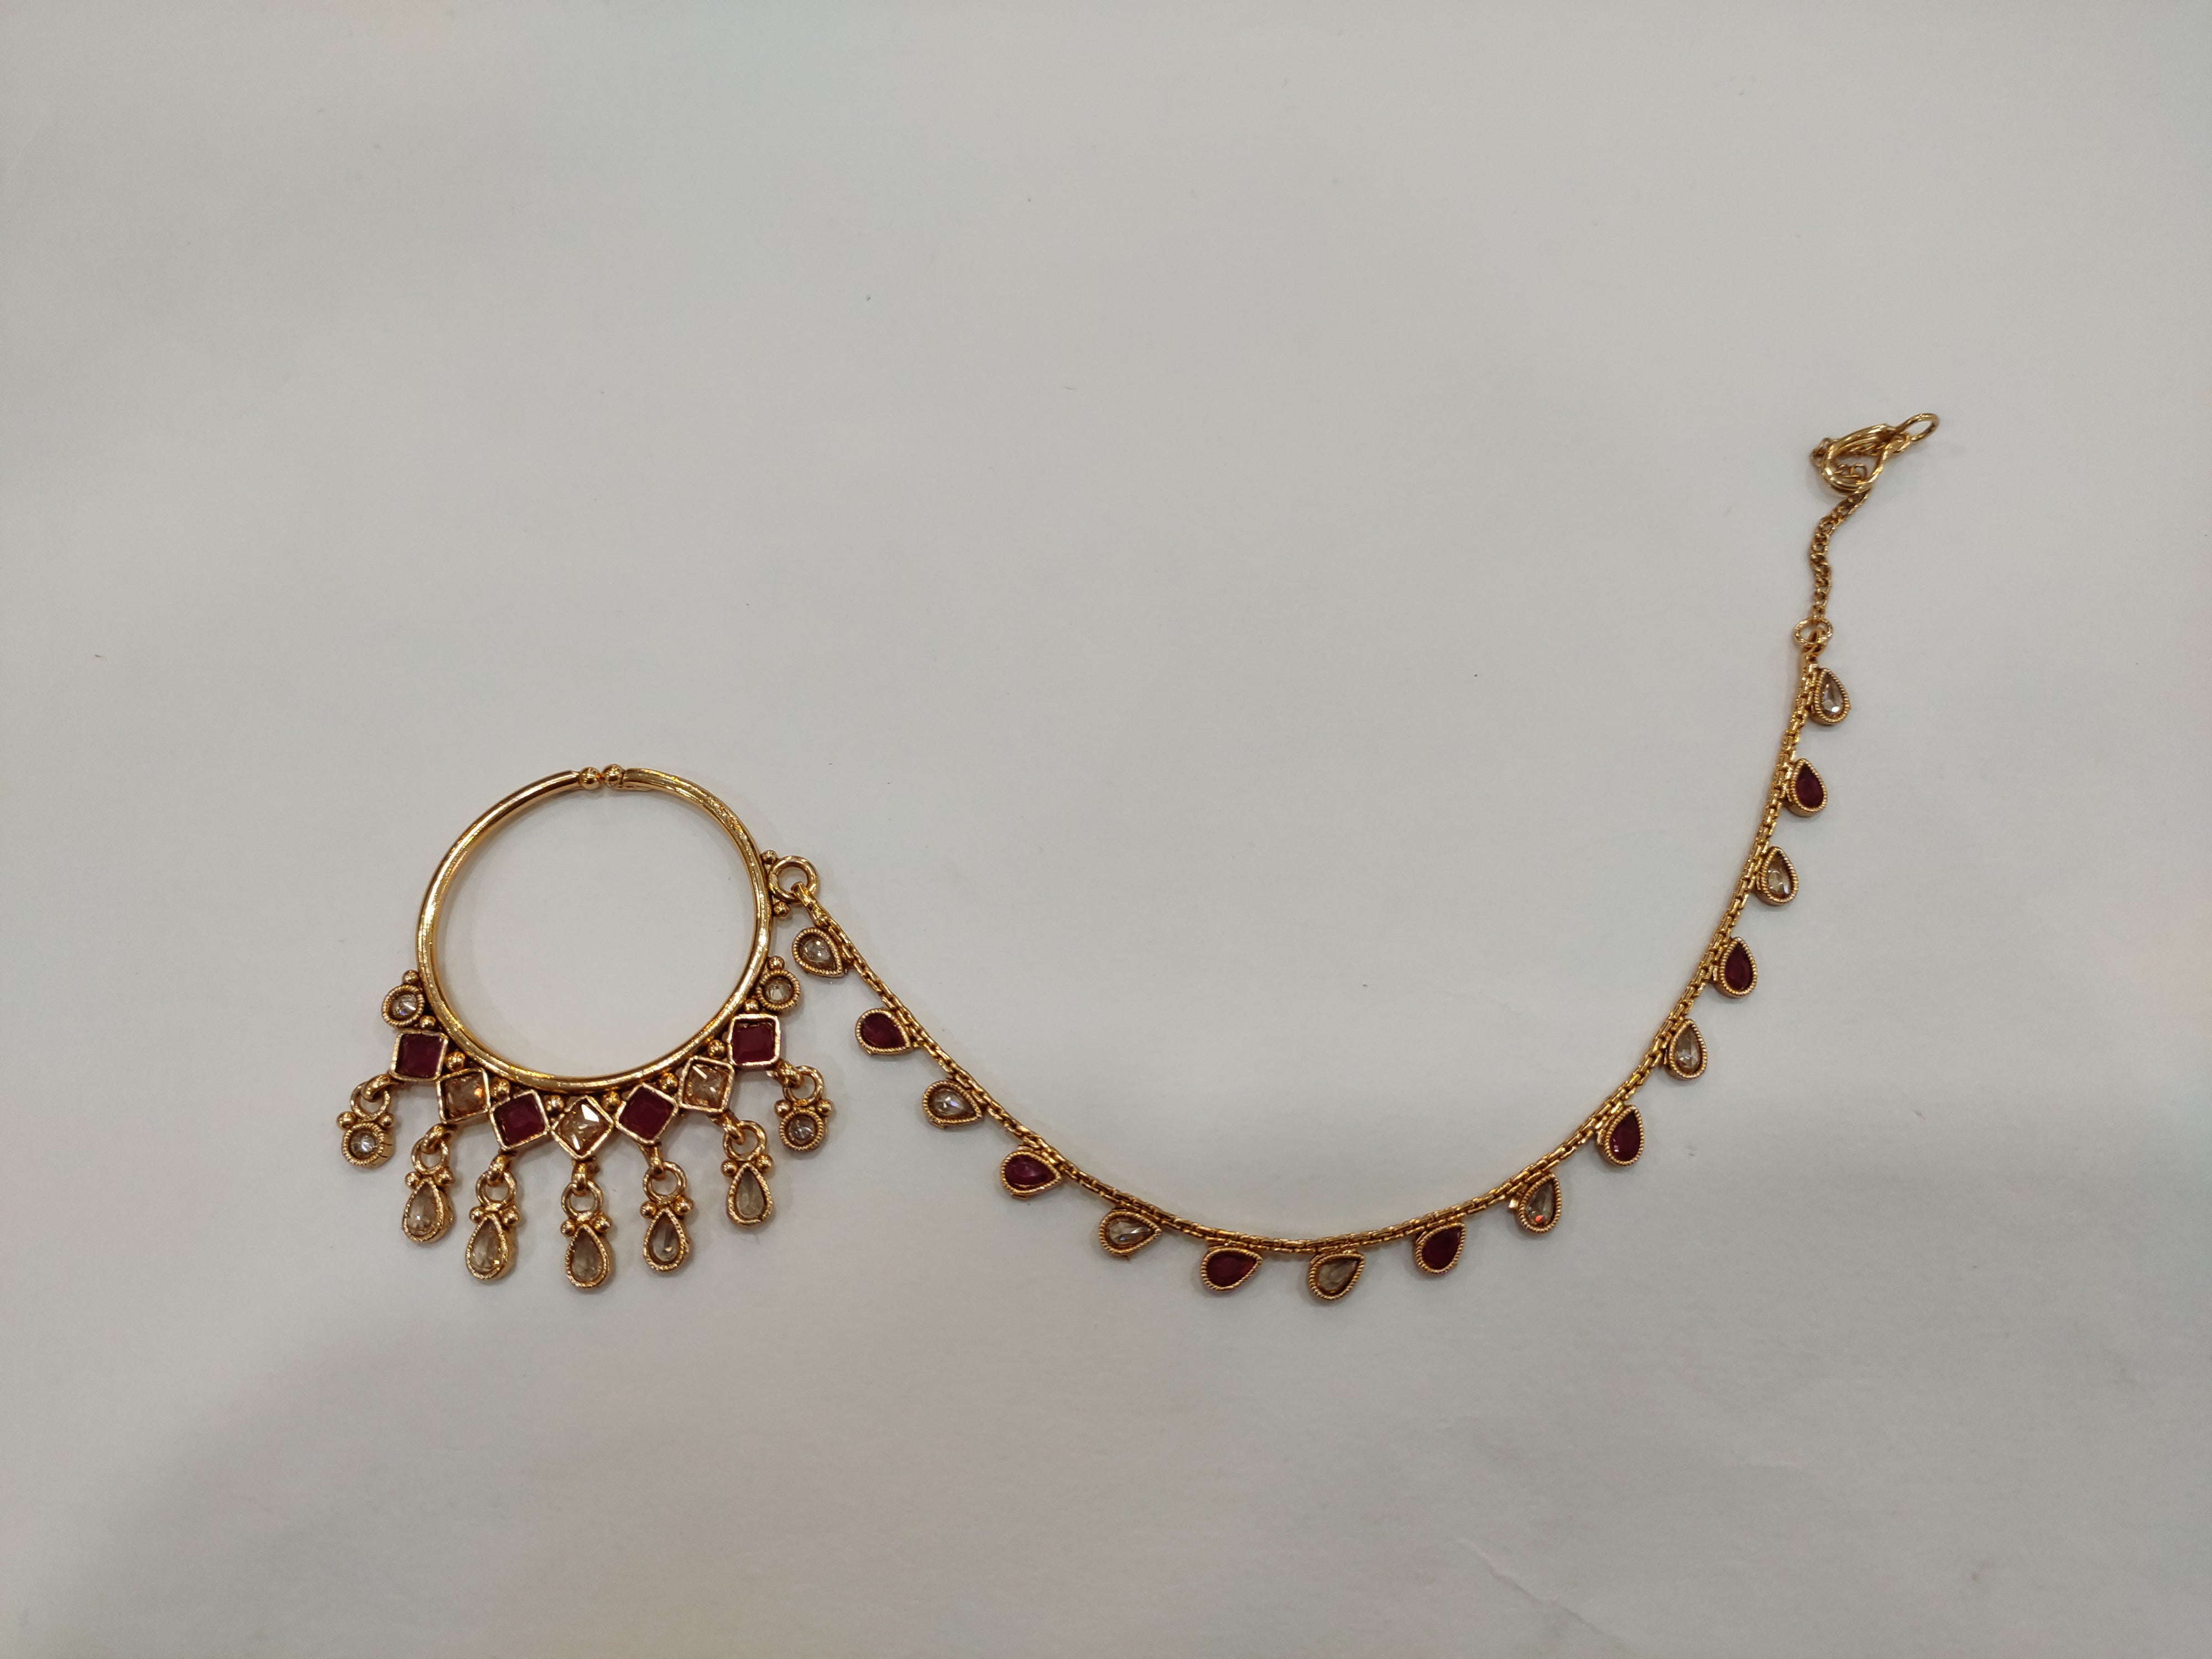 Rajasthani NoseRing(Non-Piercing)LCT Sones Oval Design